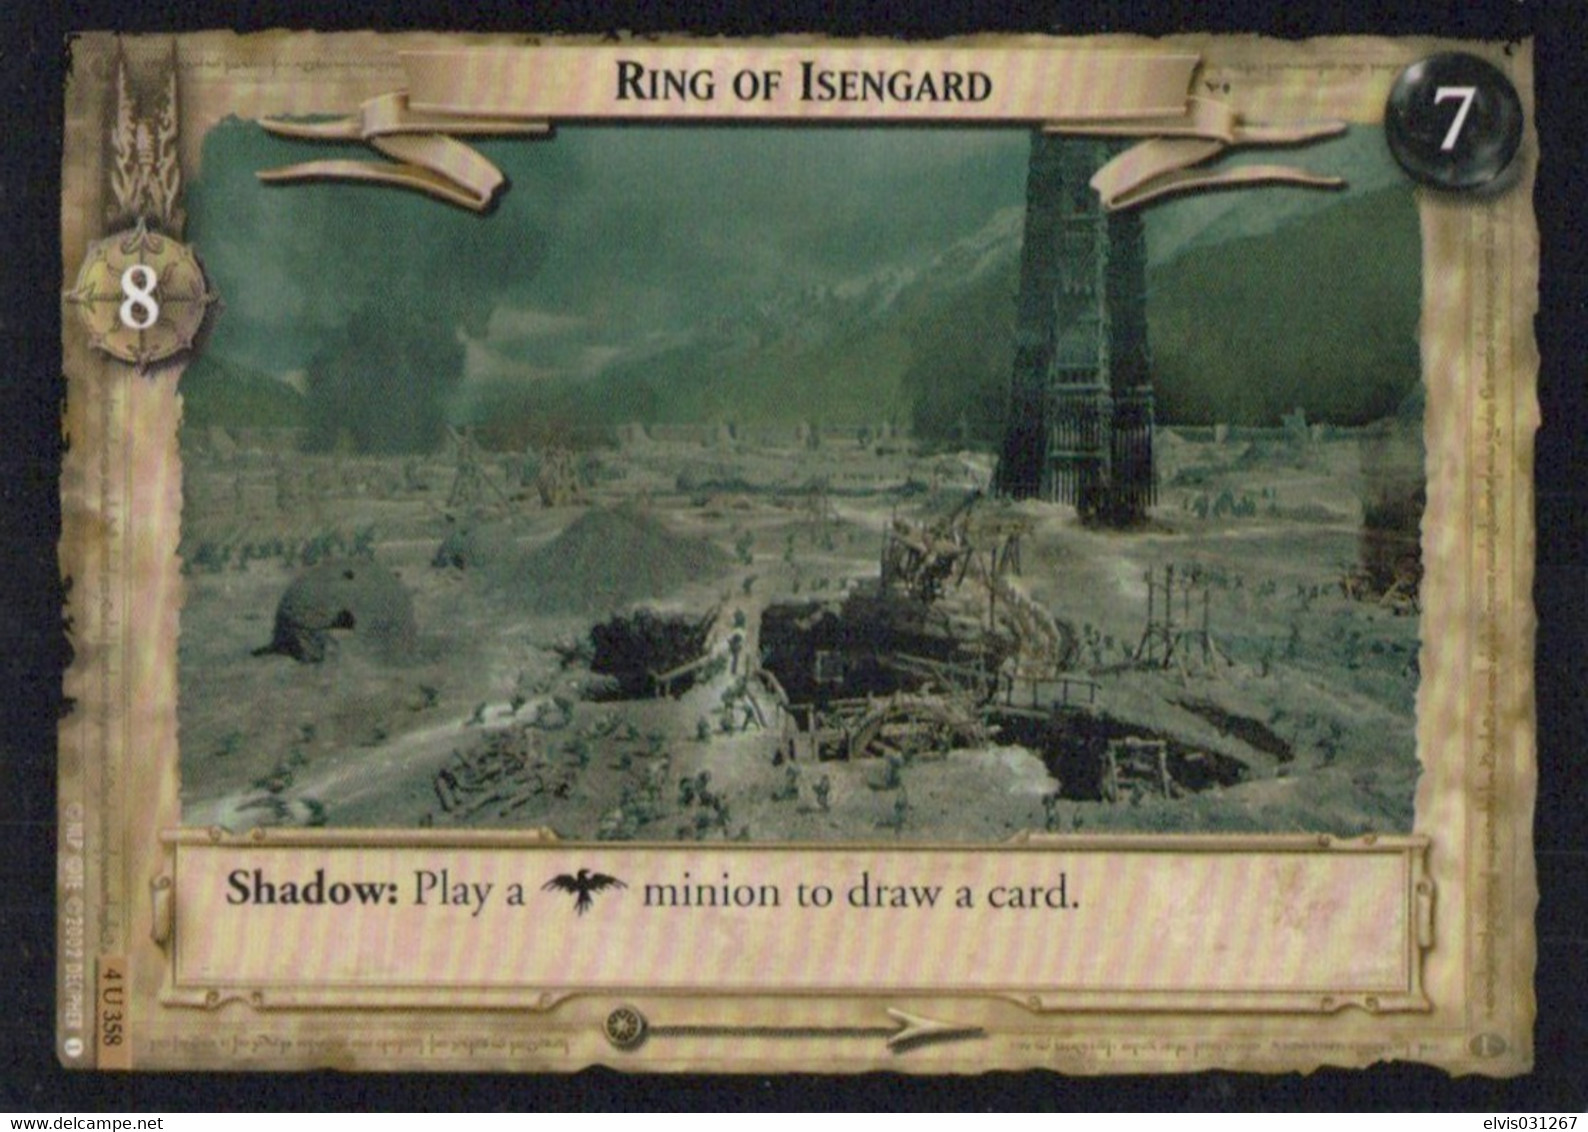 Vintage The Lord Of The Rings: #3-6 Valley Of Silverlode - EN - 2001-2004 - Mint Condition - Trading Card Game - Lord Of The Rings